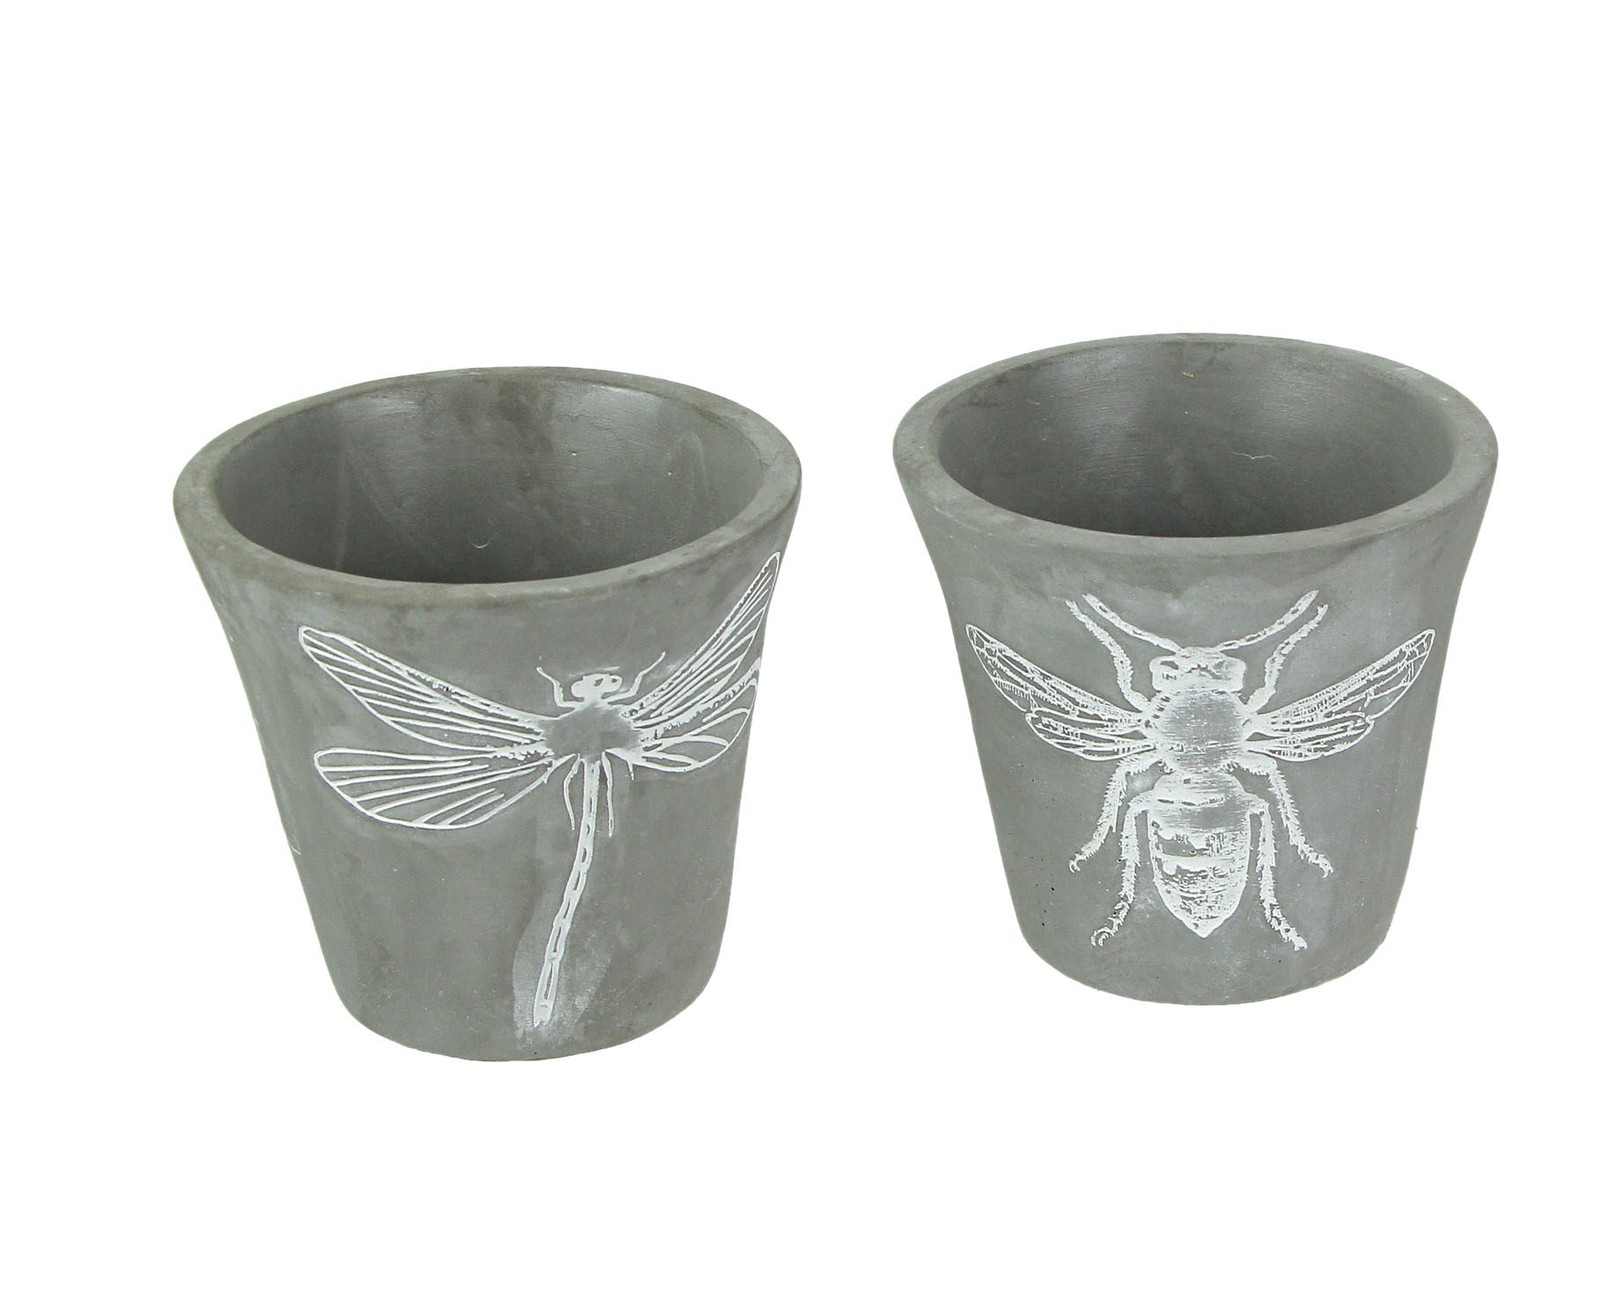 Primary image for Set of 2 Cement Planters Bee Dragonfly Decorative Flower Plant Pot